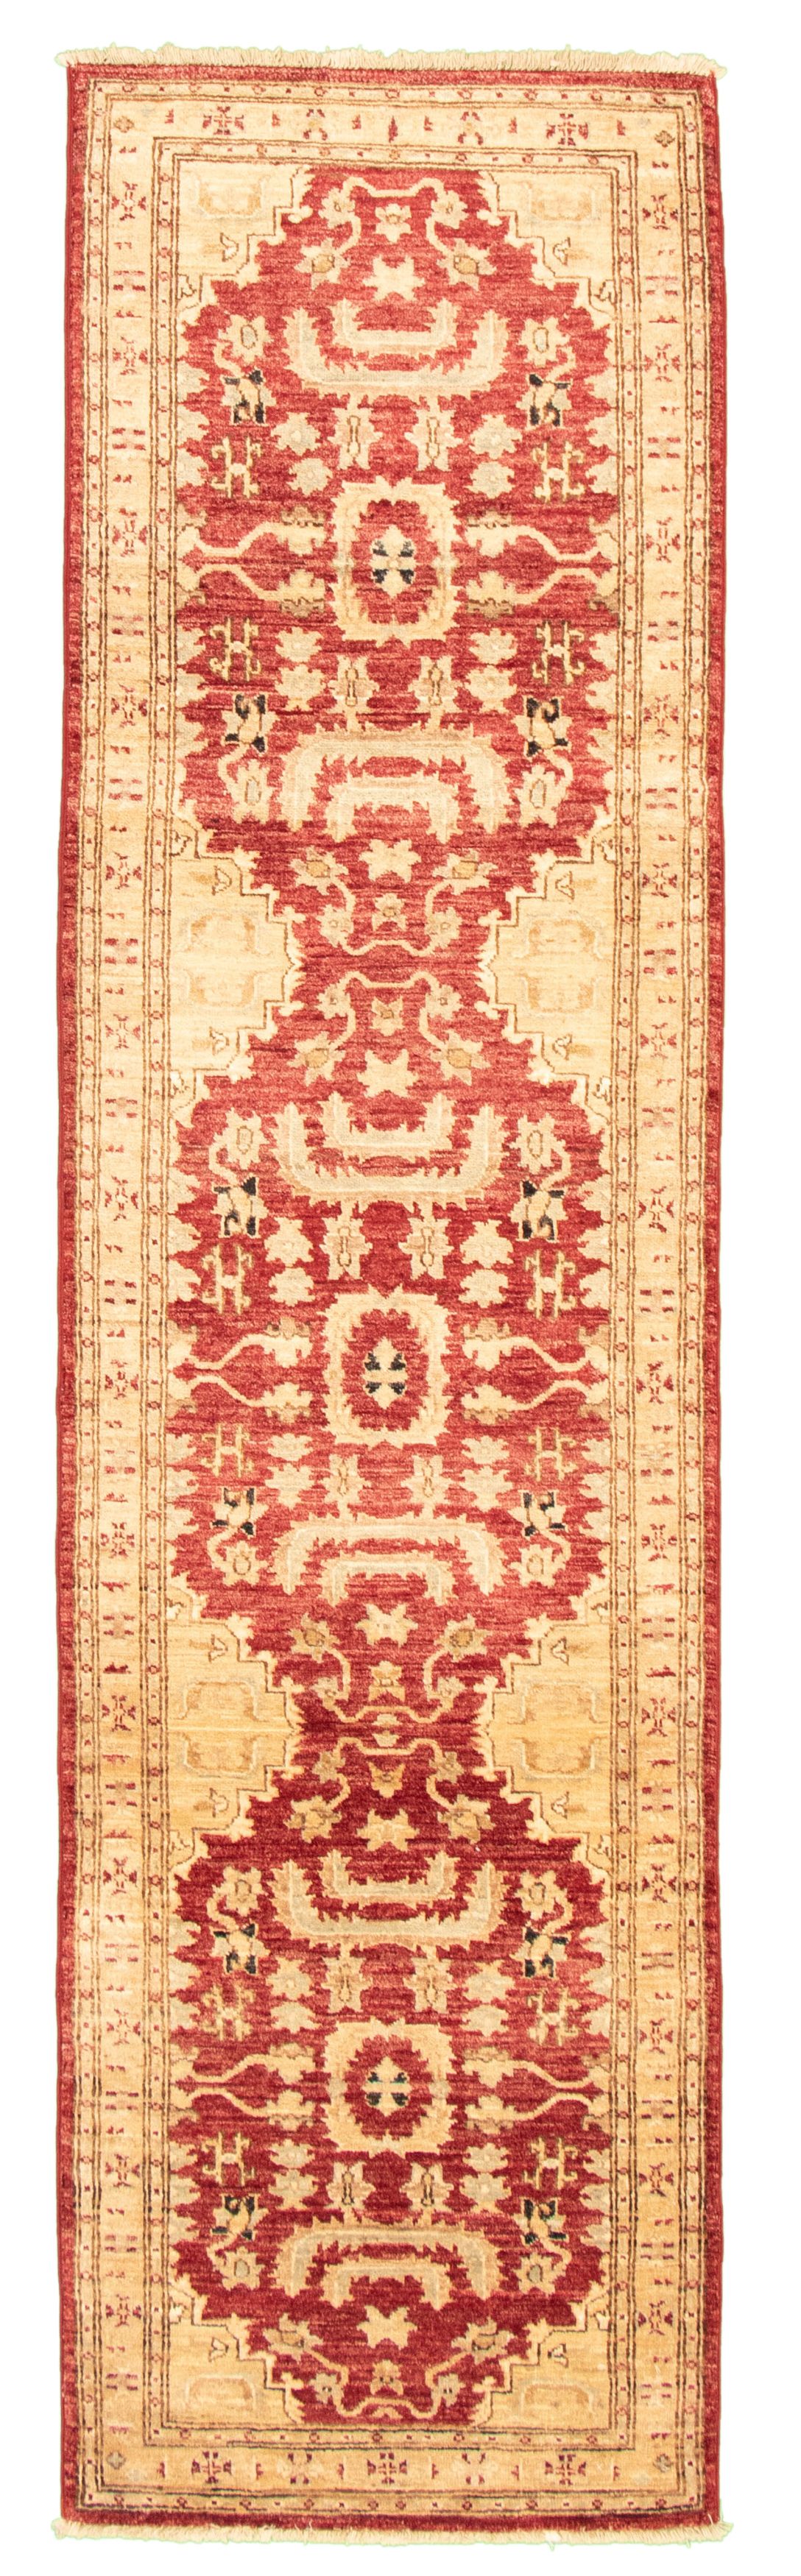 Hand-knotted Chobi Finest Dark Red Wool Rug 2'8" x 10'2" Size: 2'8" x 10'2"  